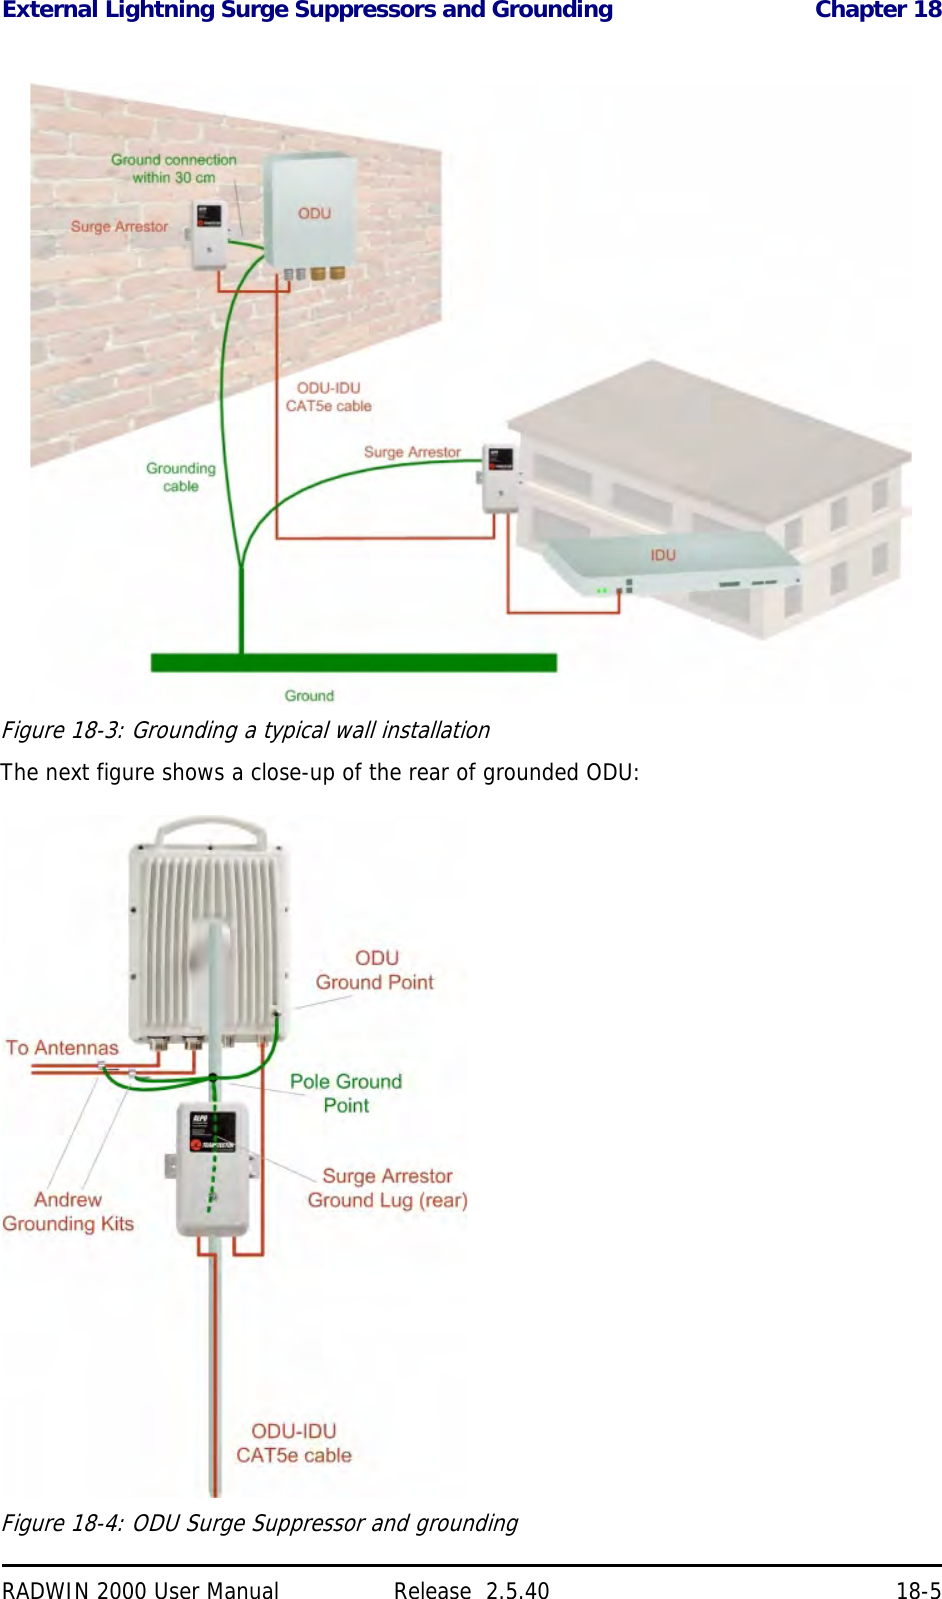 External Lightning Surge Suppressors and Grounding Chapter 18RADWIN 2000 User Manual Release  2.5.40 18-5Figure 18-3: Grounding a typical wall installationThe next figure shows a close-up of the rear of grounded ODU:Figure 18-4: ODU Surge Suppressor and grounding